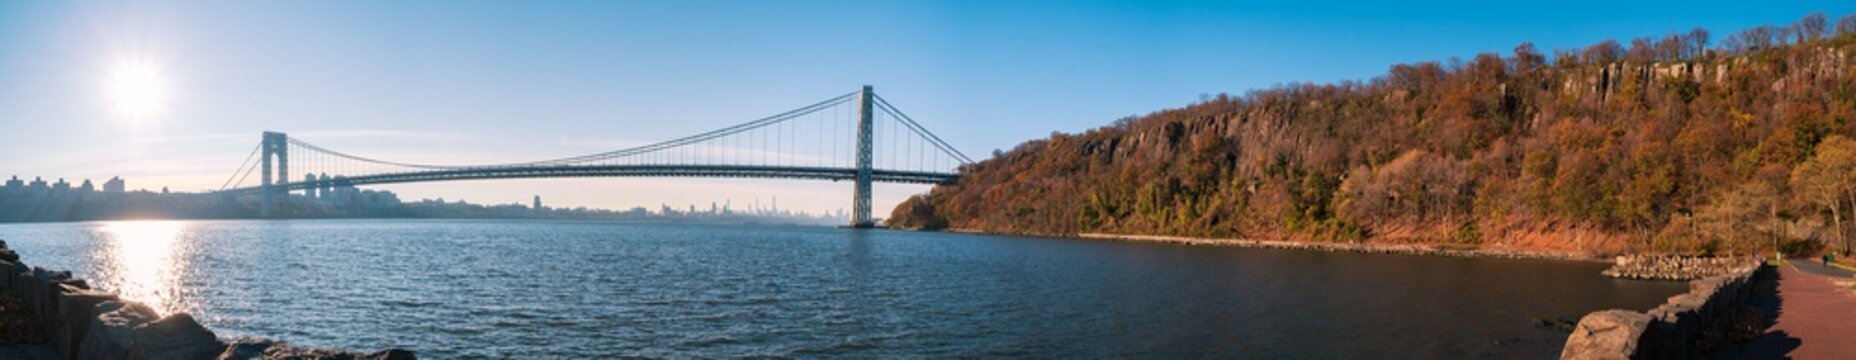 Panorama of the Gorge Washington bridge over the Hudson River in New York